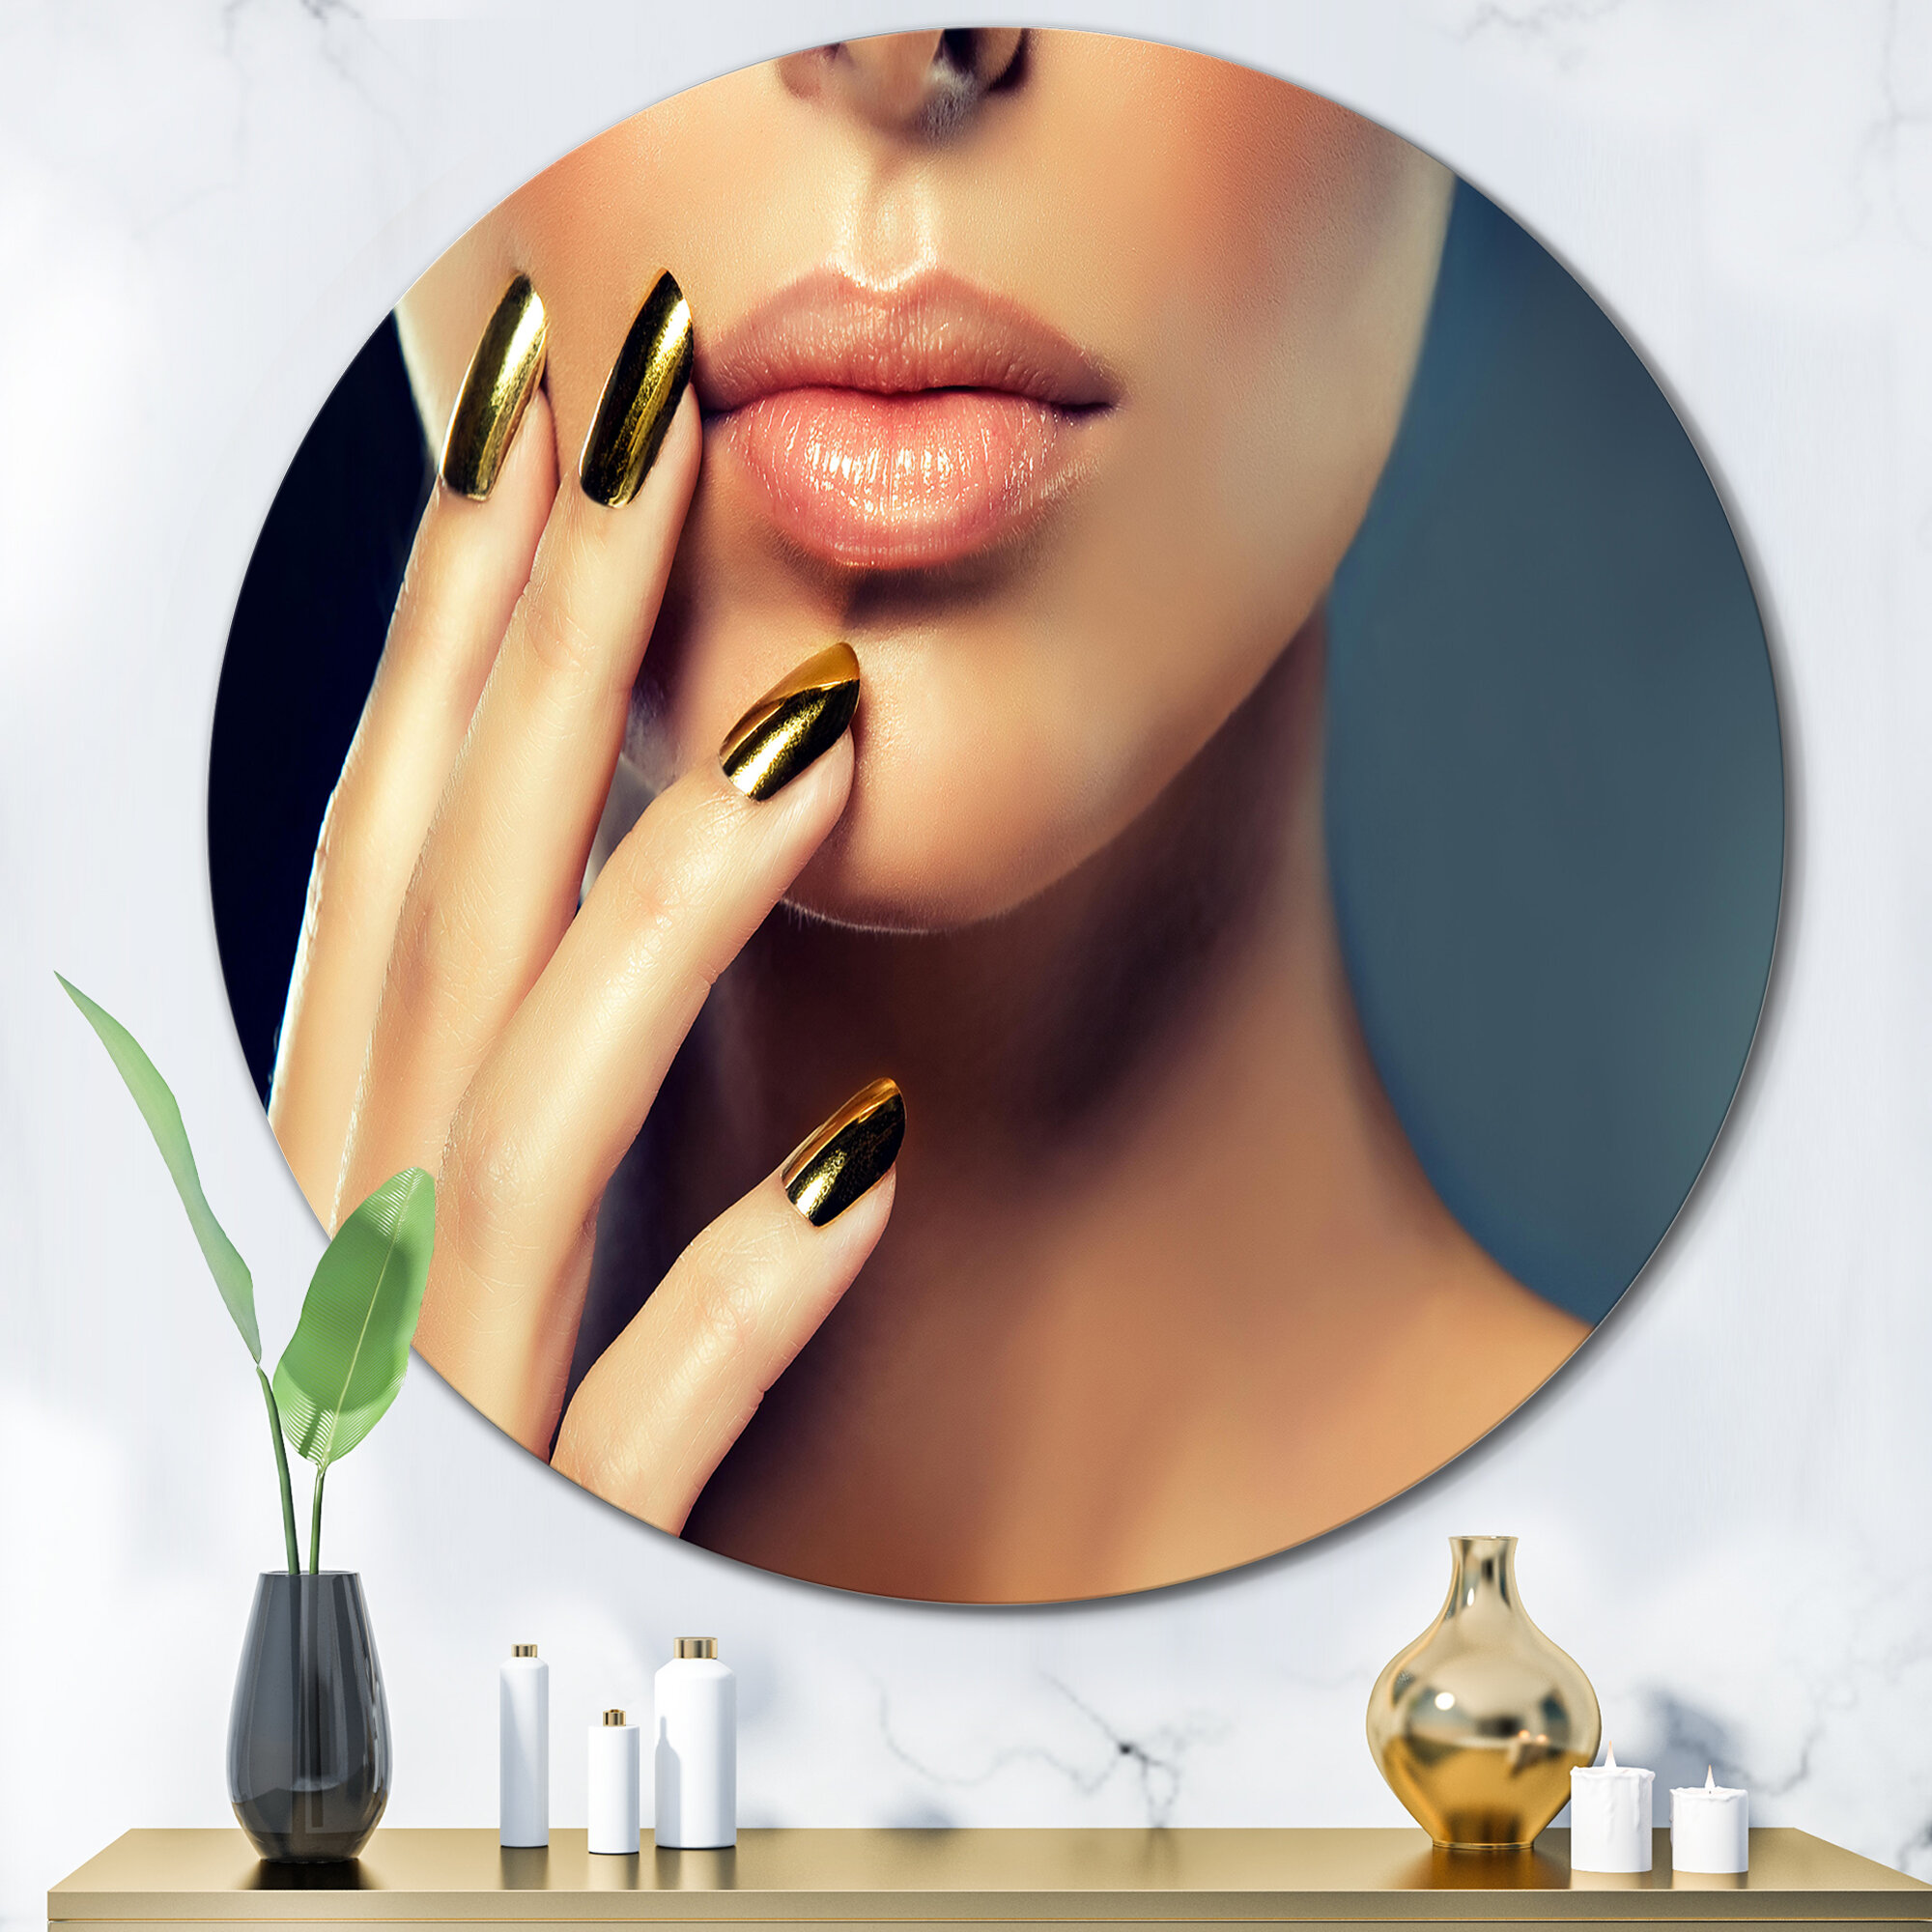 Everly Quinn Female Model With Golden Make-Up And Black Nails - Unframed  Print on Metal | Wayfair